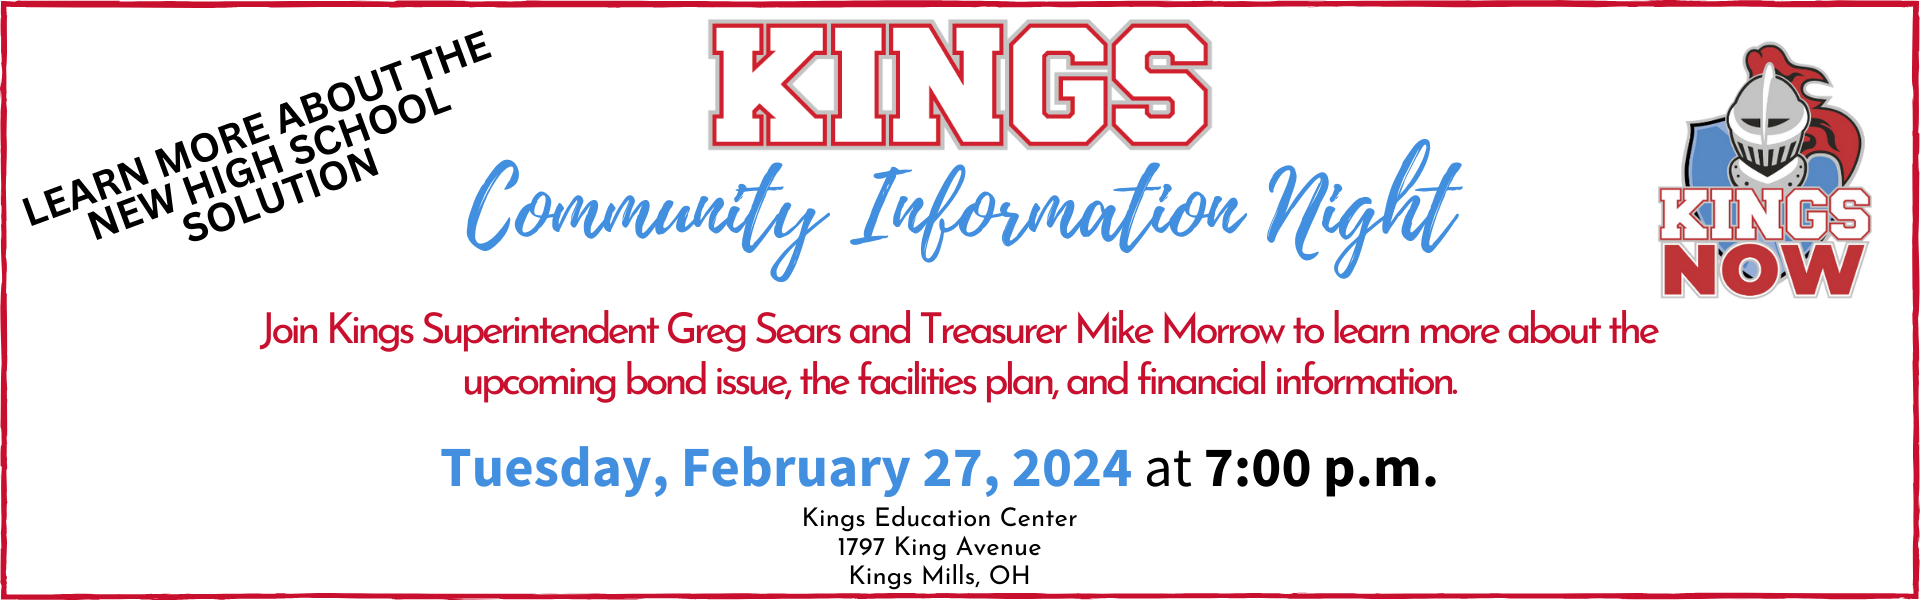 Kings Community Information Night Feb 27 at 7pm at Kings Education Center. Learn more about the upcoming bond issue and district finances from the superintendent and treasurer